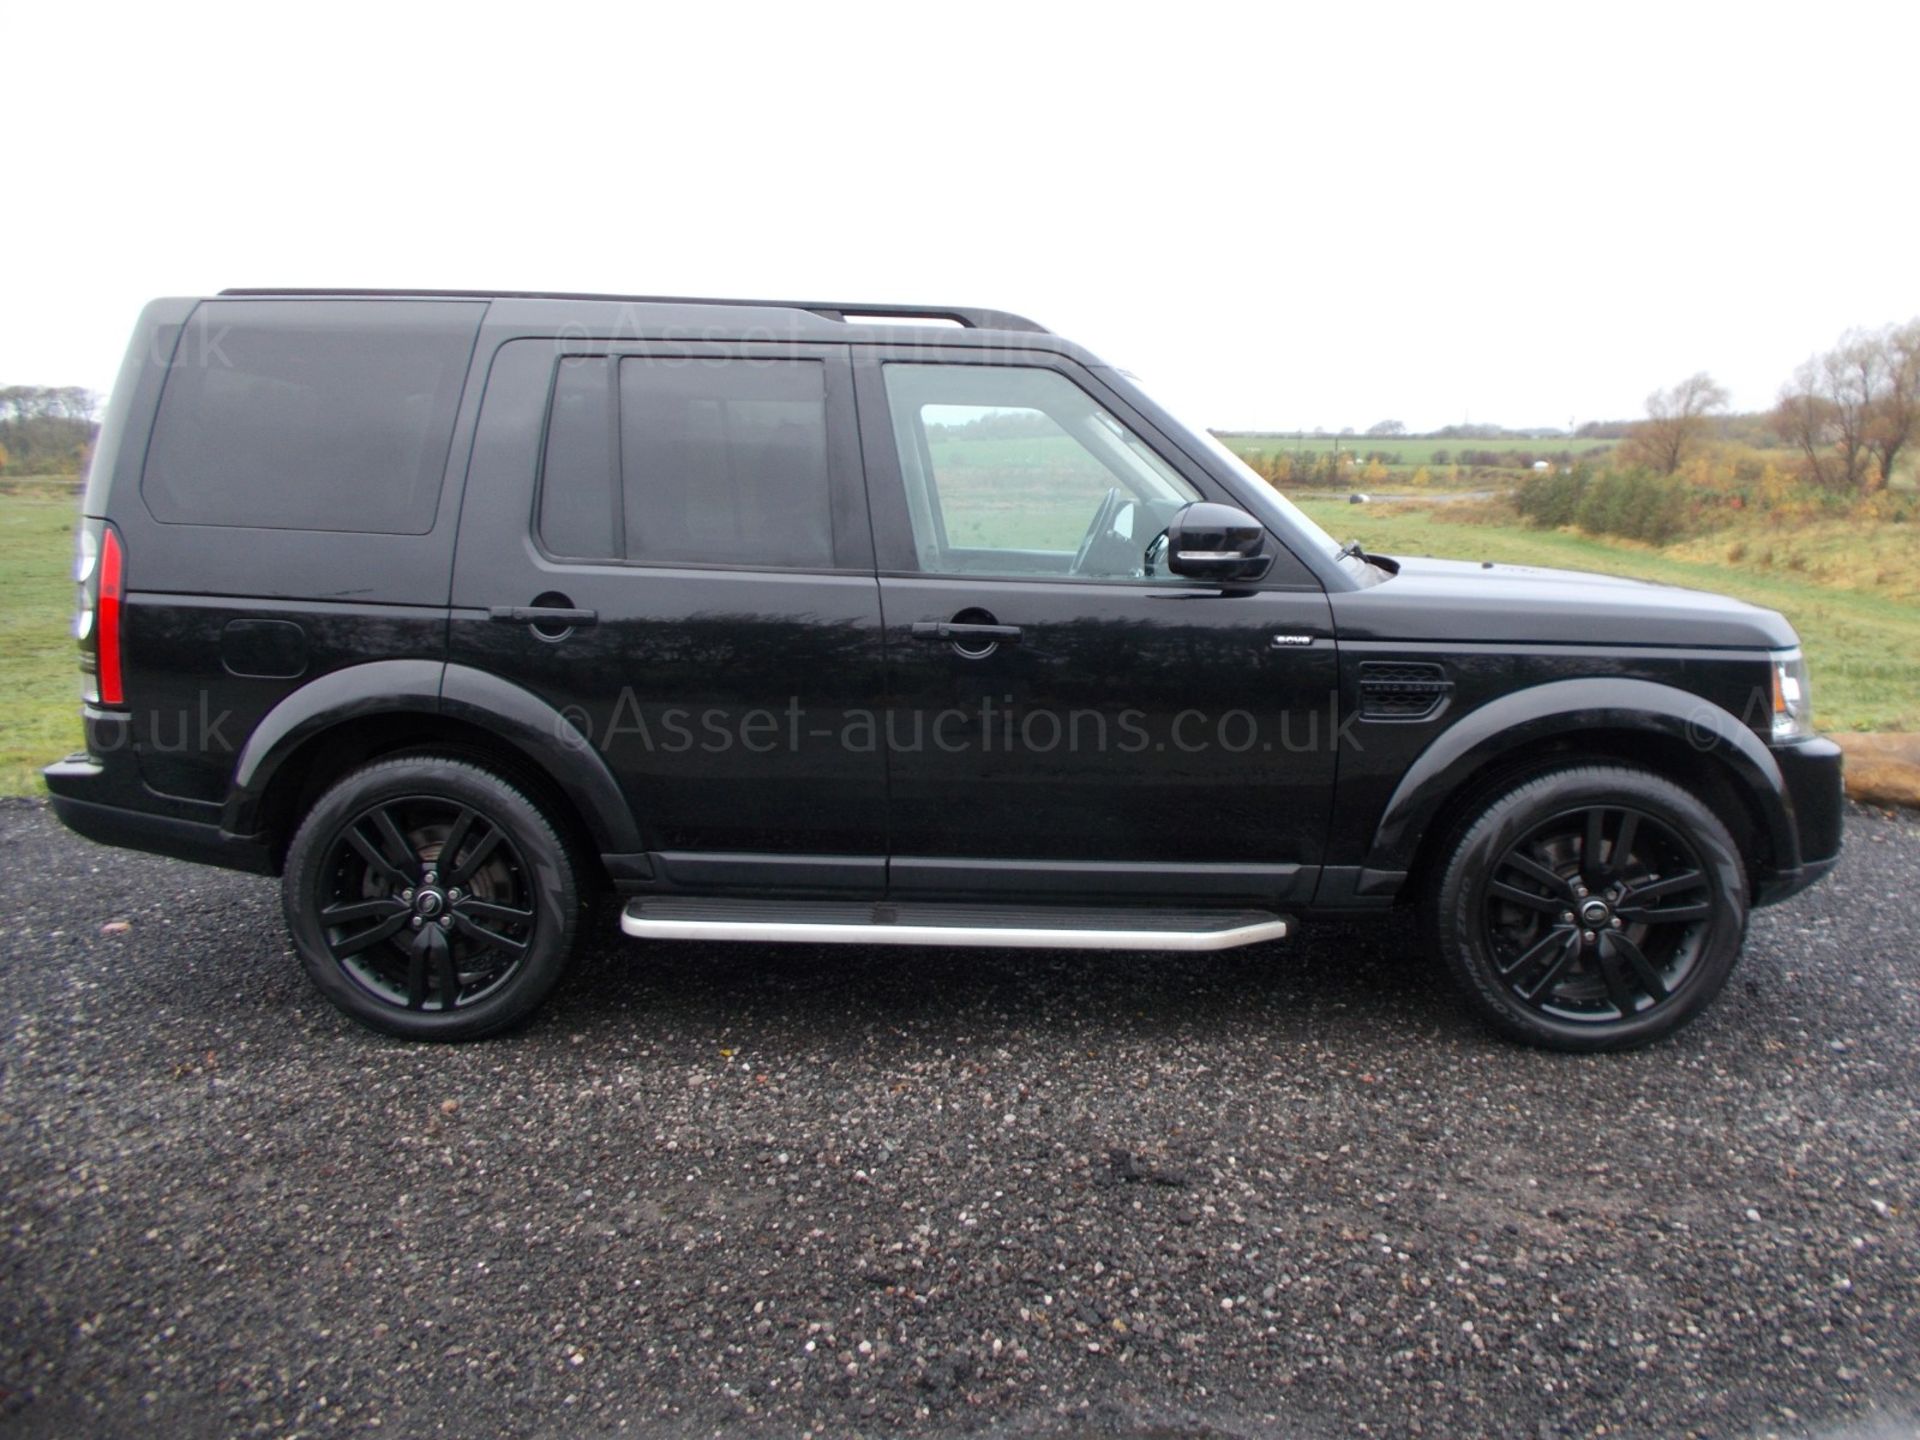 2015/64 LAND ROVER DISCOVERY HSE LUXURY SCV6 7 SEATER, 3.0 V6 PETROL SUPERCHARGED *PLUS VAT* - Image 8 of 28